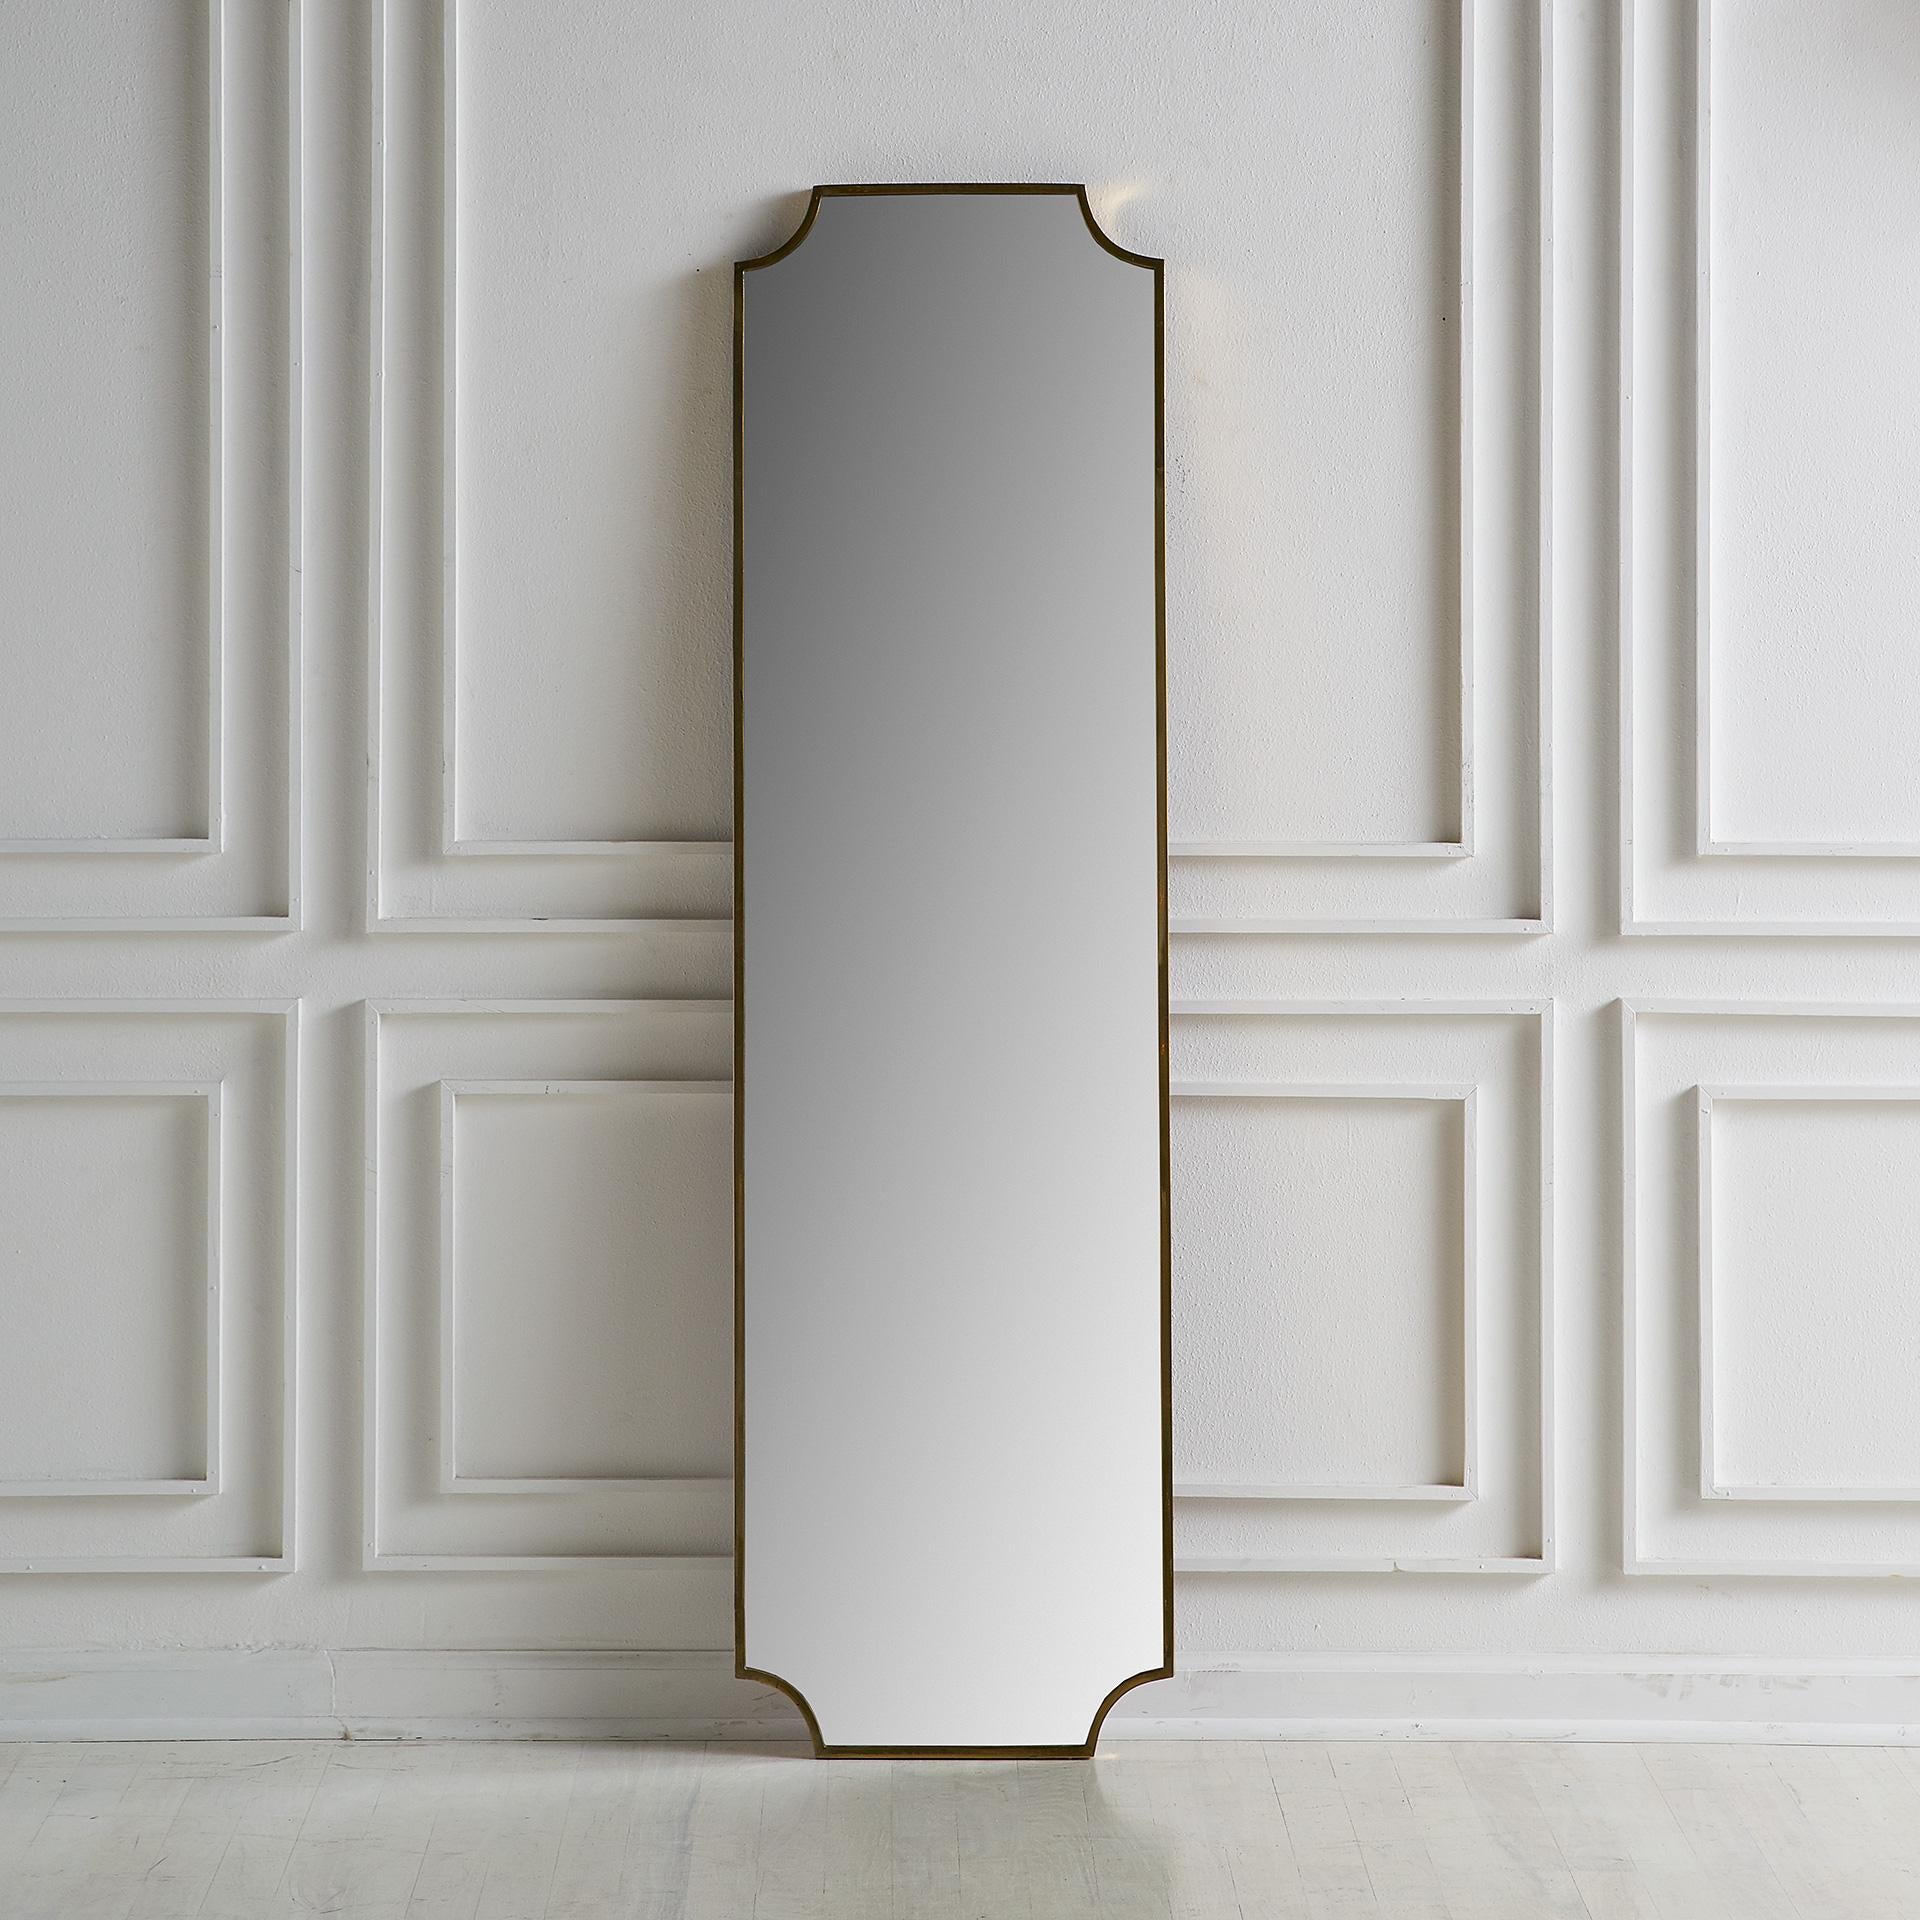 We’re always on the lookout for versatile mirror. This mirror was sourced in Europe and features a beautiful scalloped shape brass frame. Finished with a wooden back. Ready to hang.

Dimensions: 57” H x 16” W x 1” D

Condition: Slight areas of